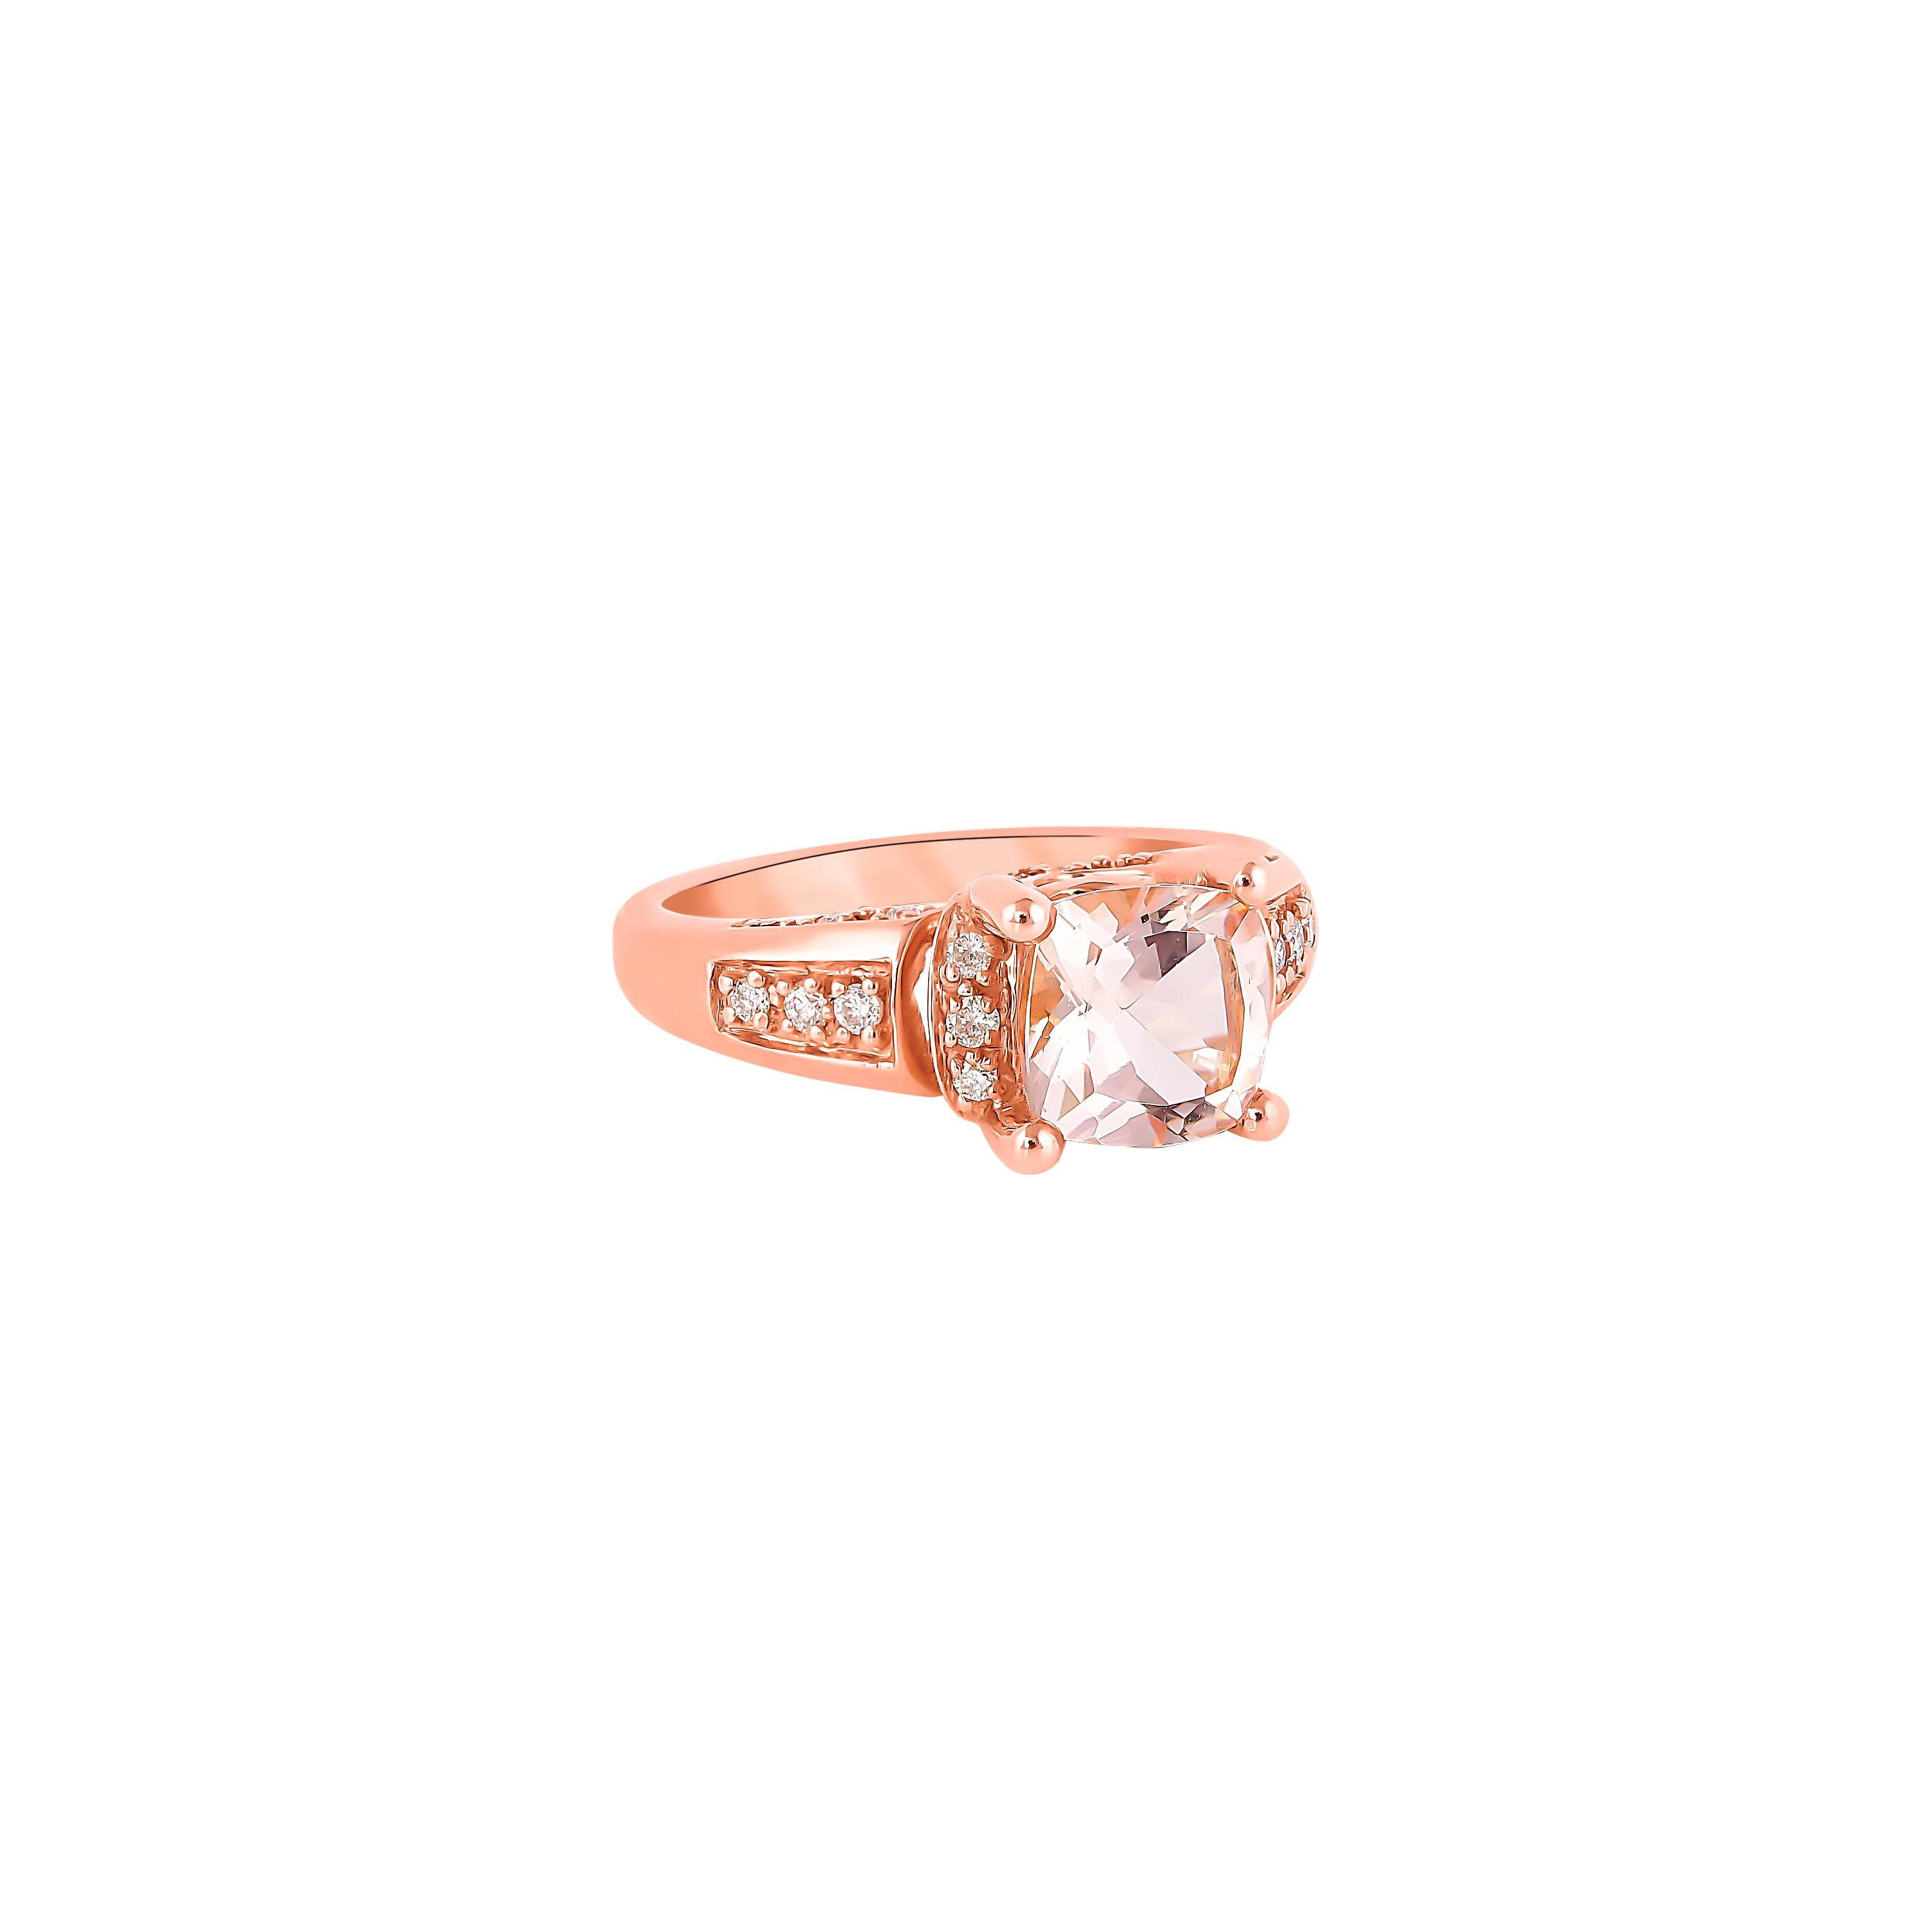 This collection features an array of magnificent morganites! Accented with Diamonds these rings are made in rose gold and present a classic yet elegant look. 

Classic morganite ring in 18K Rose gold with Diamond. 

Morganite: 2.00 carat, 8X8mm